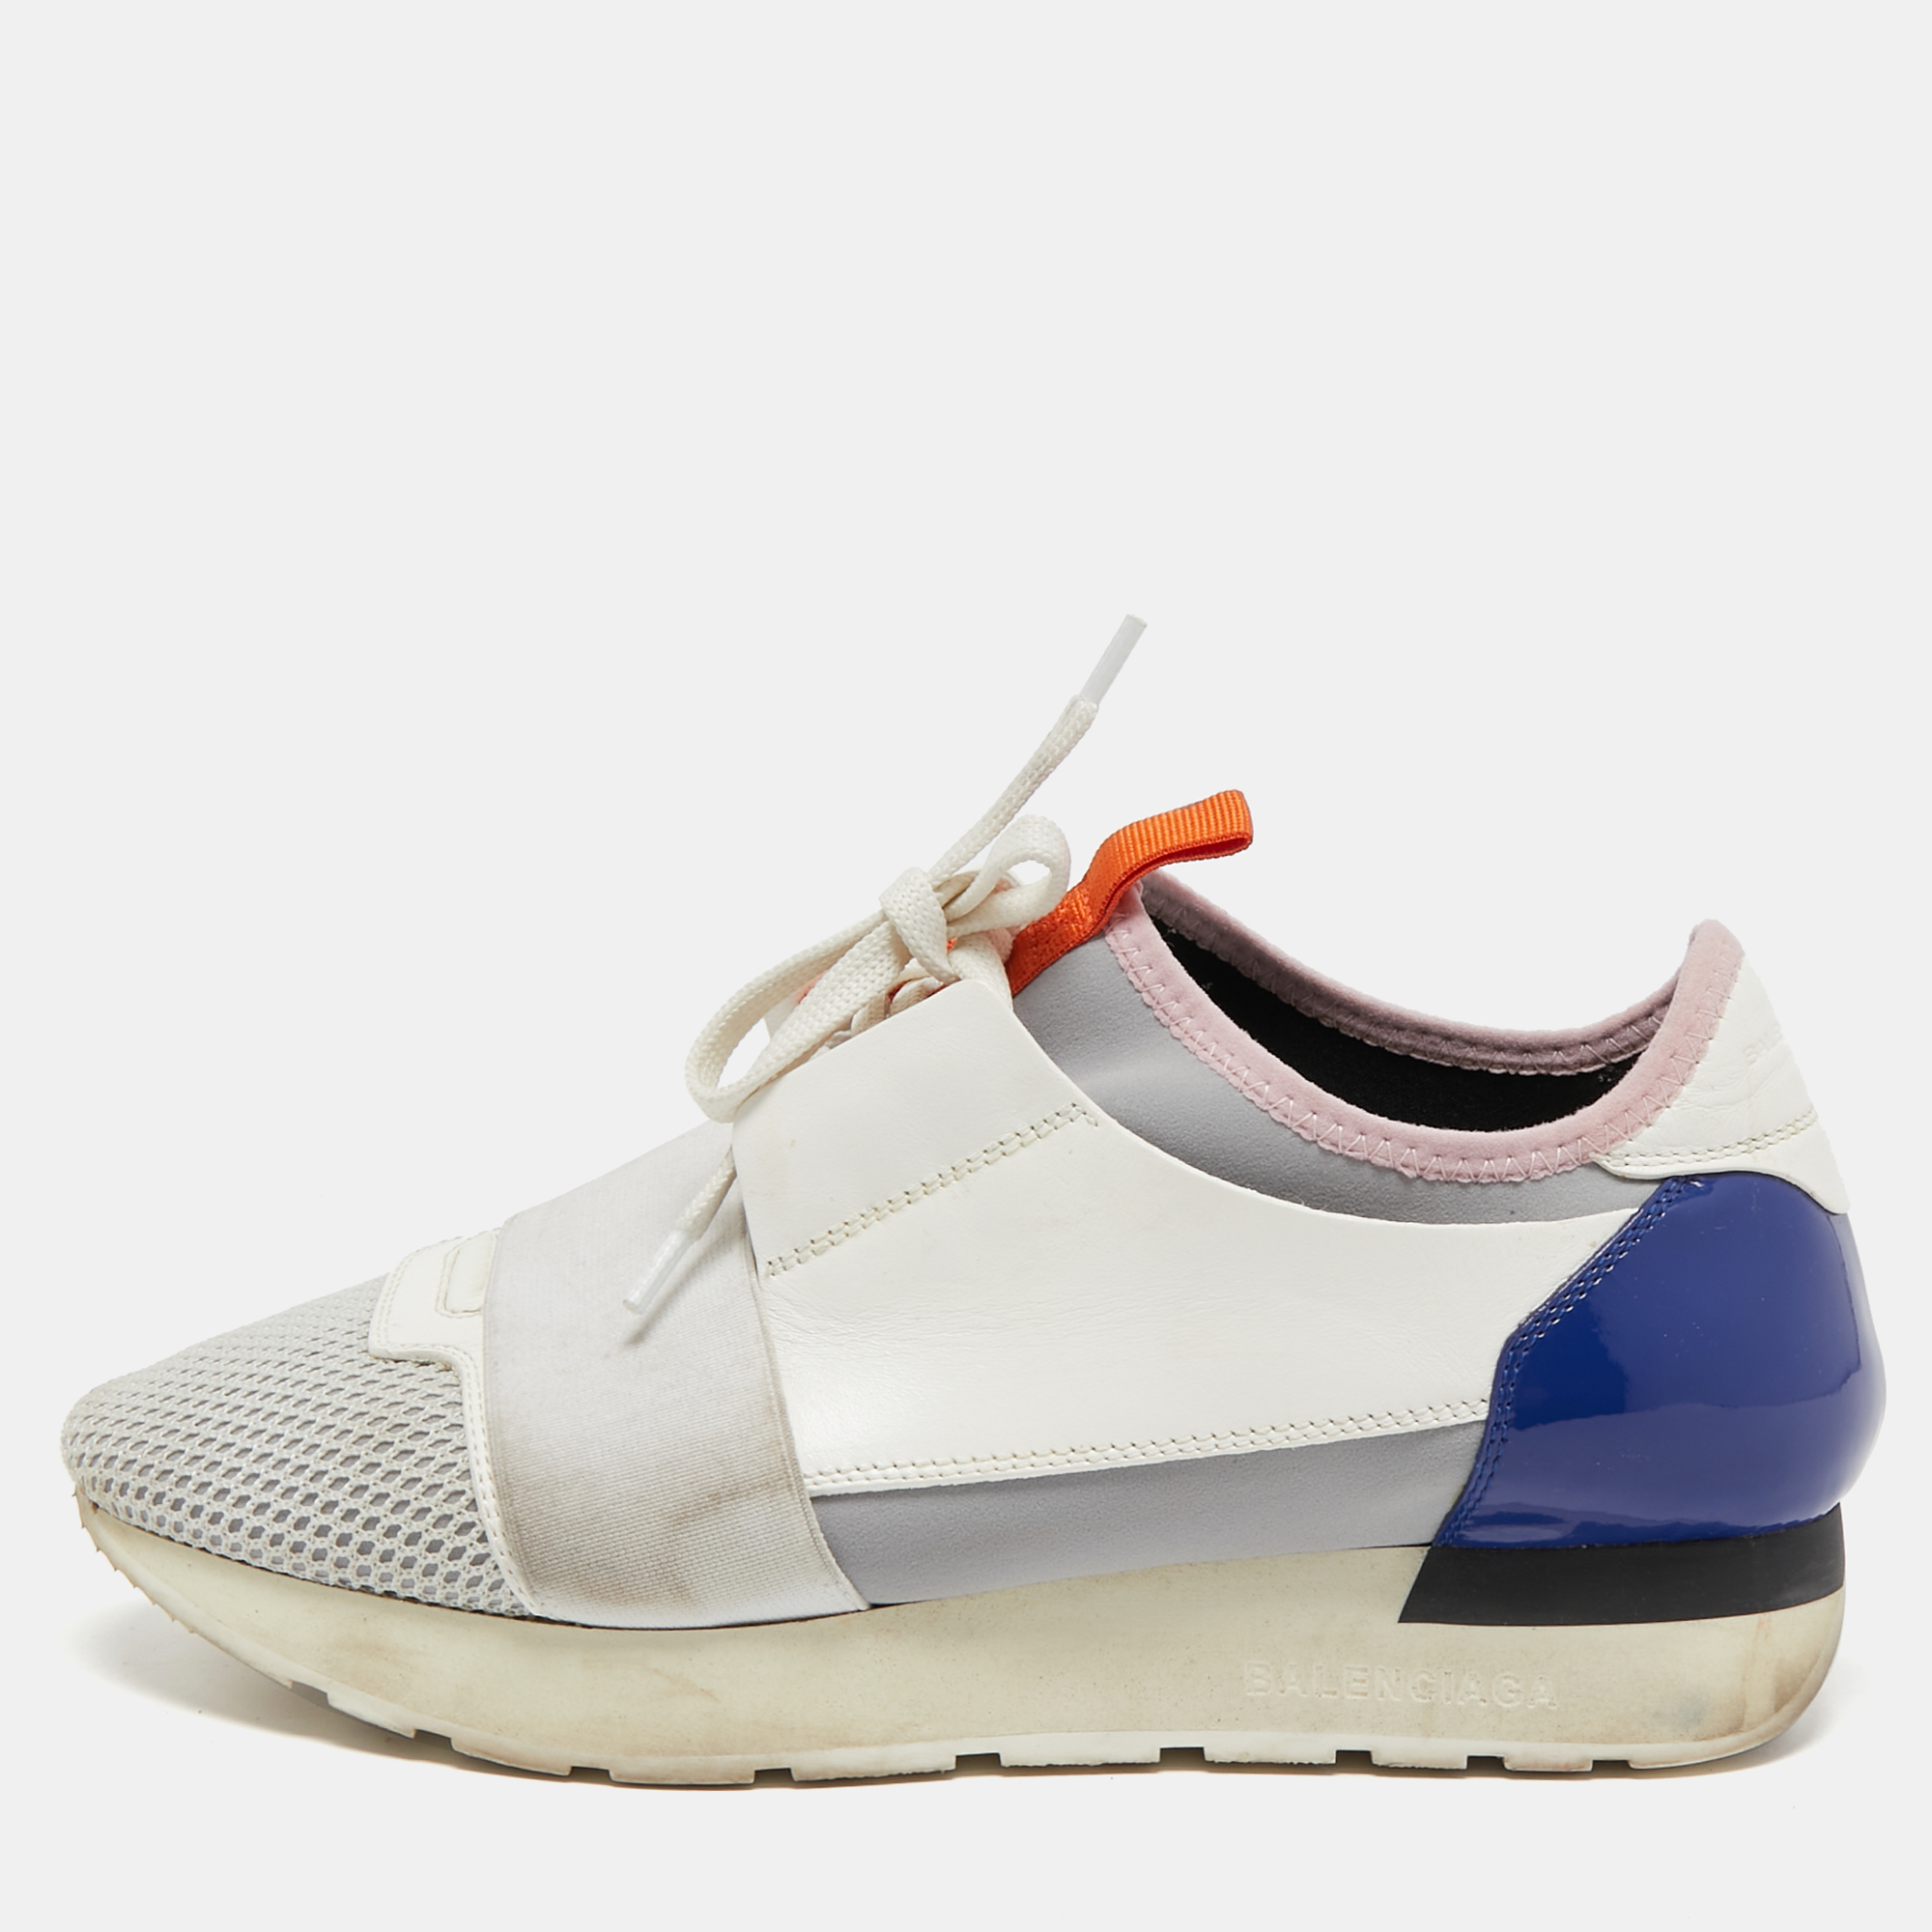 Balenciaga tricolor leather and mesh race runner sneakers size 37